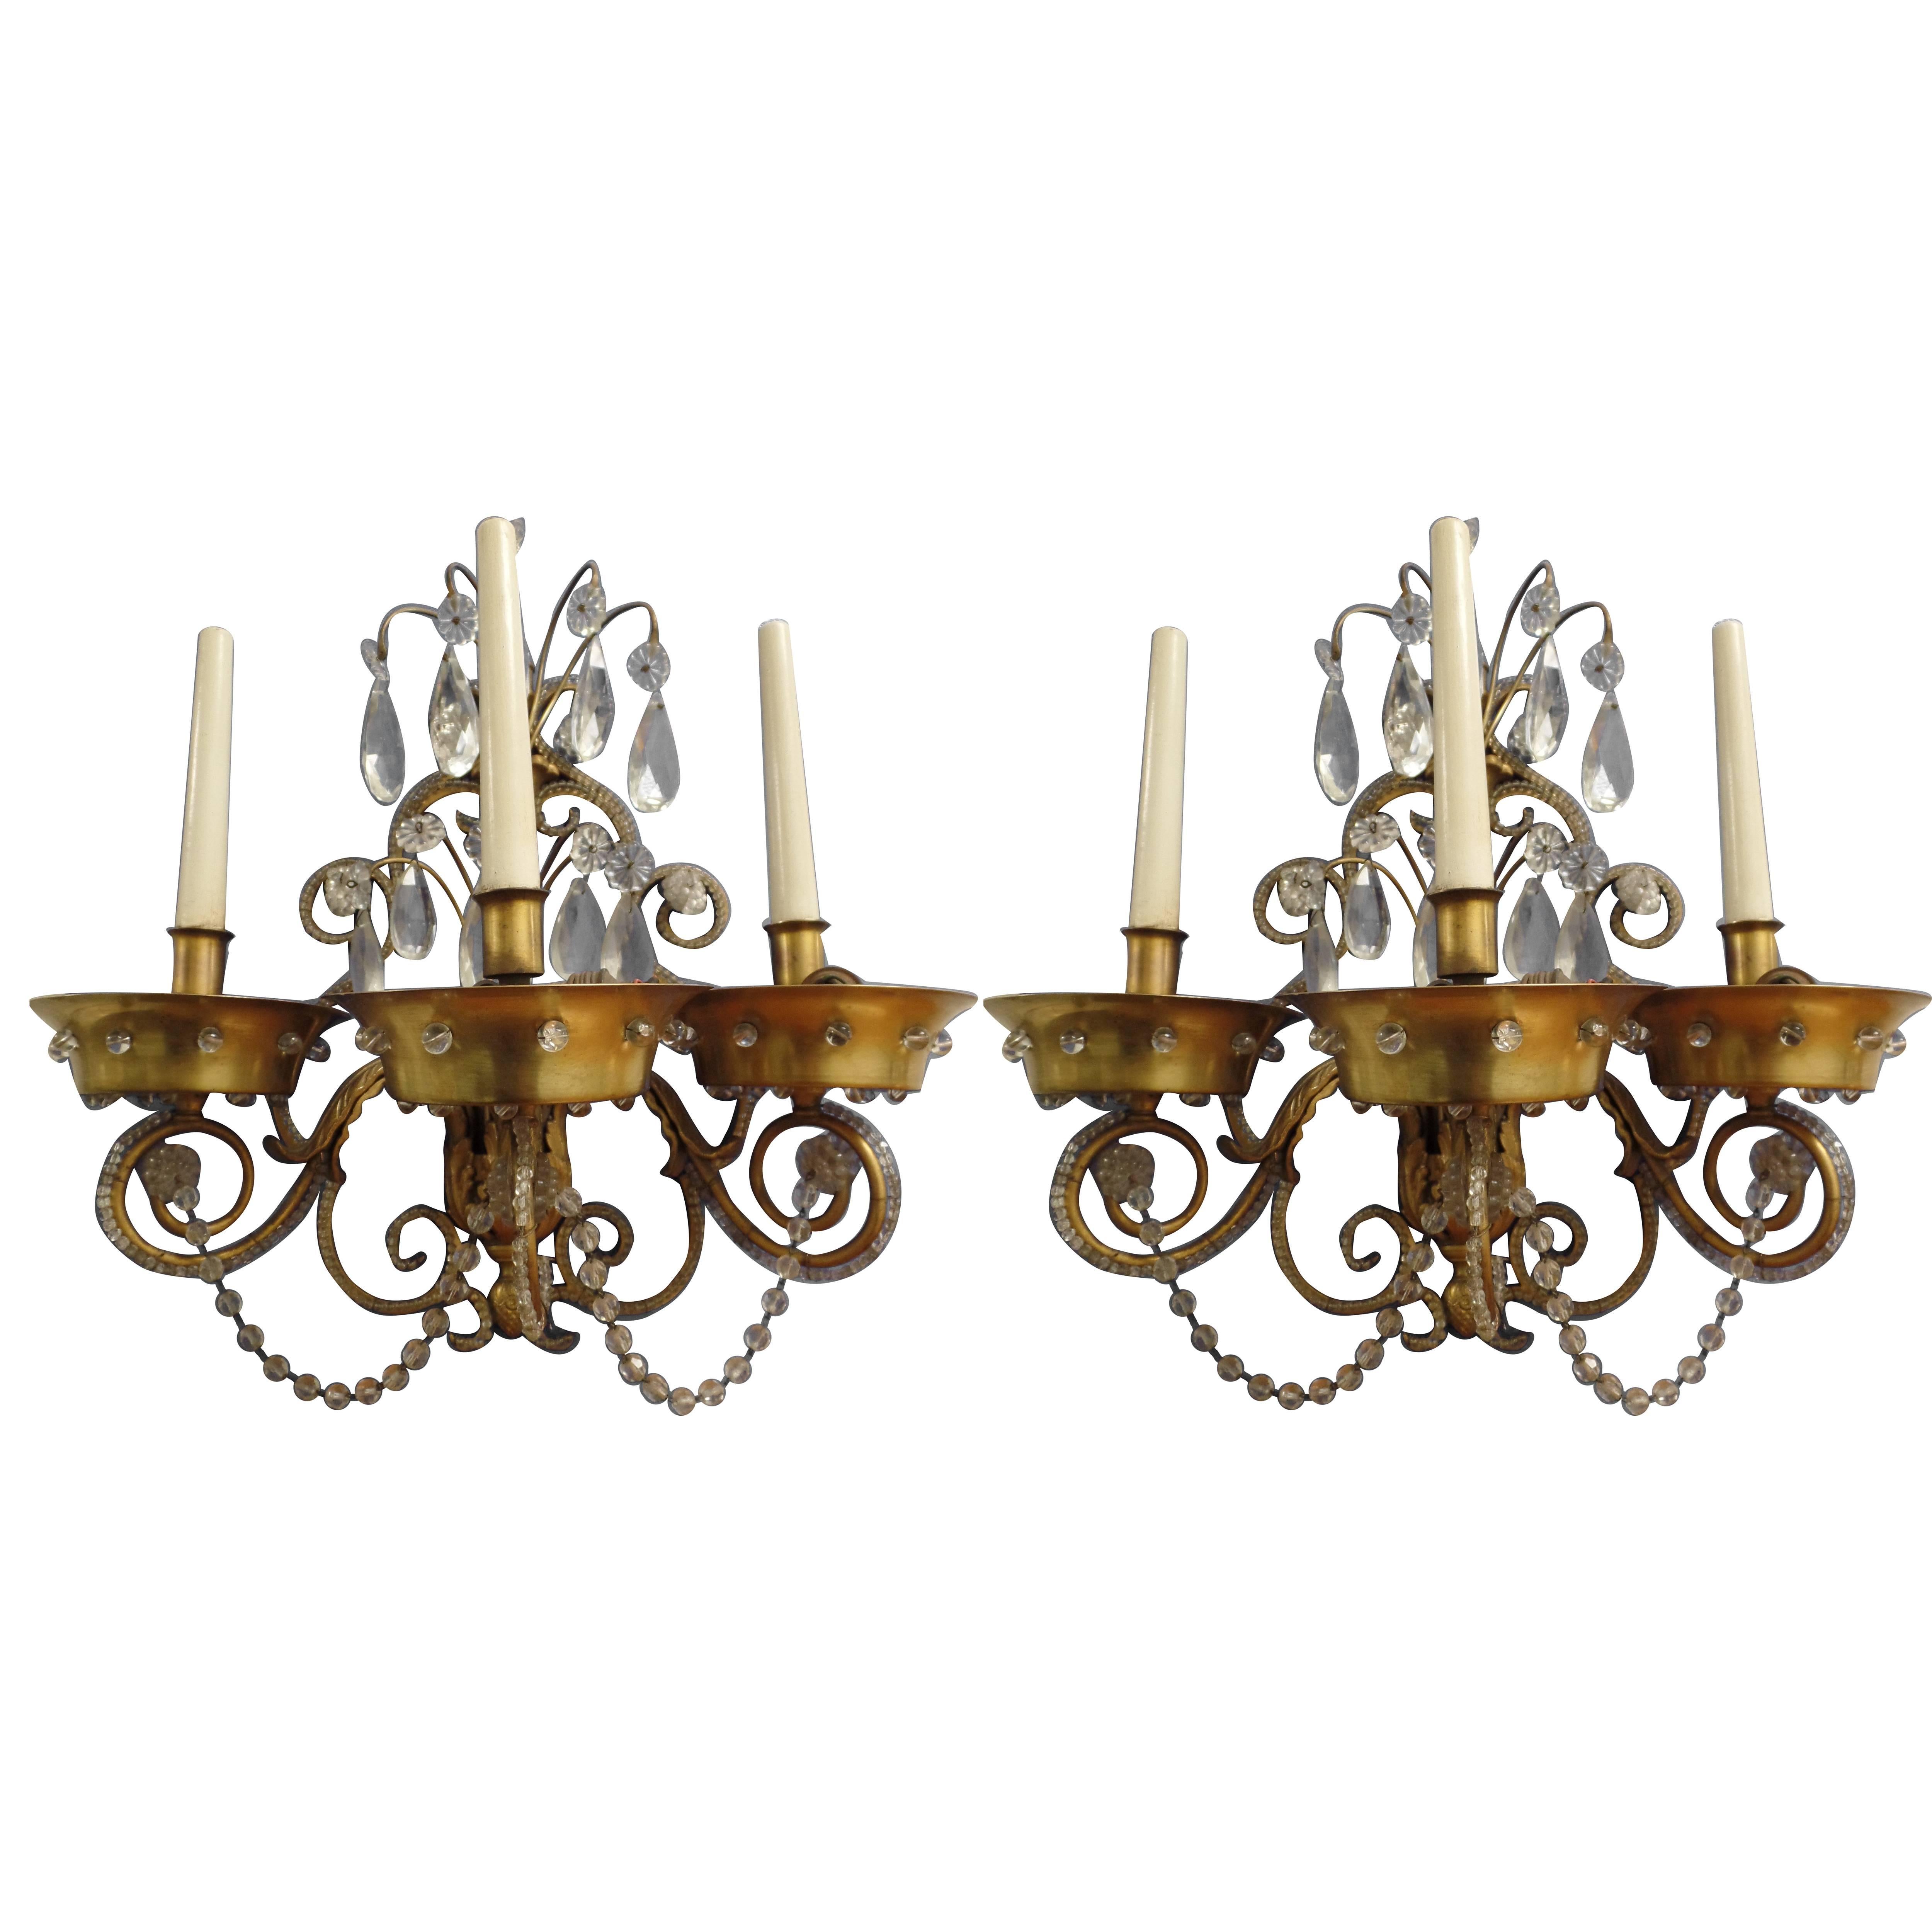 Pair of French Modern Neoclassical Brass and Crystal Sconces by Maison Jansen